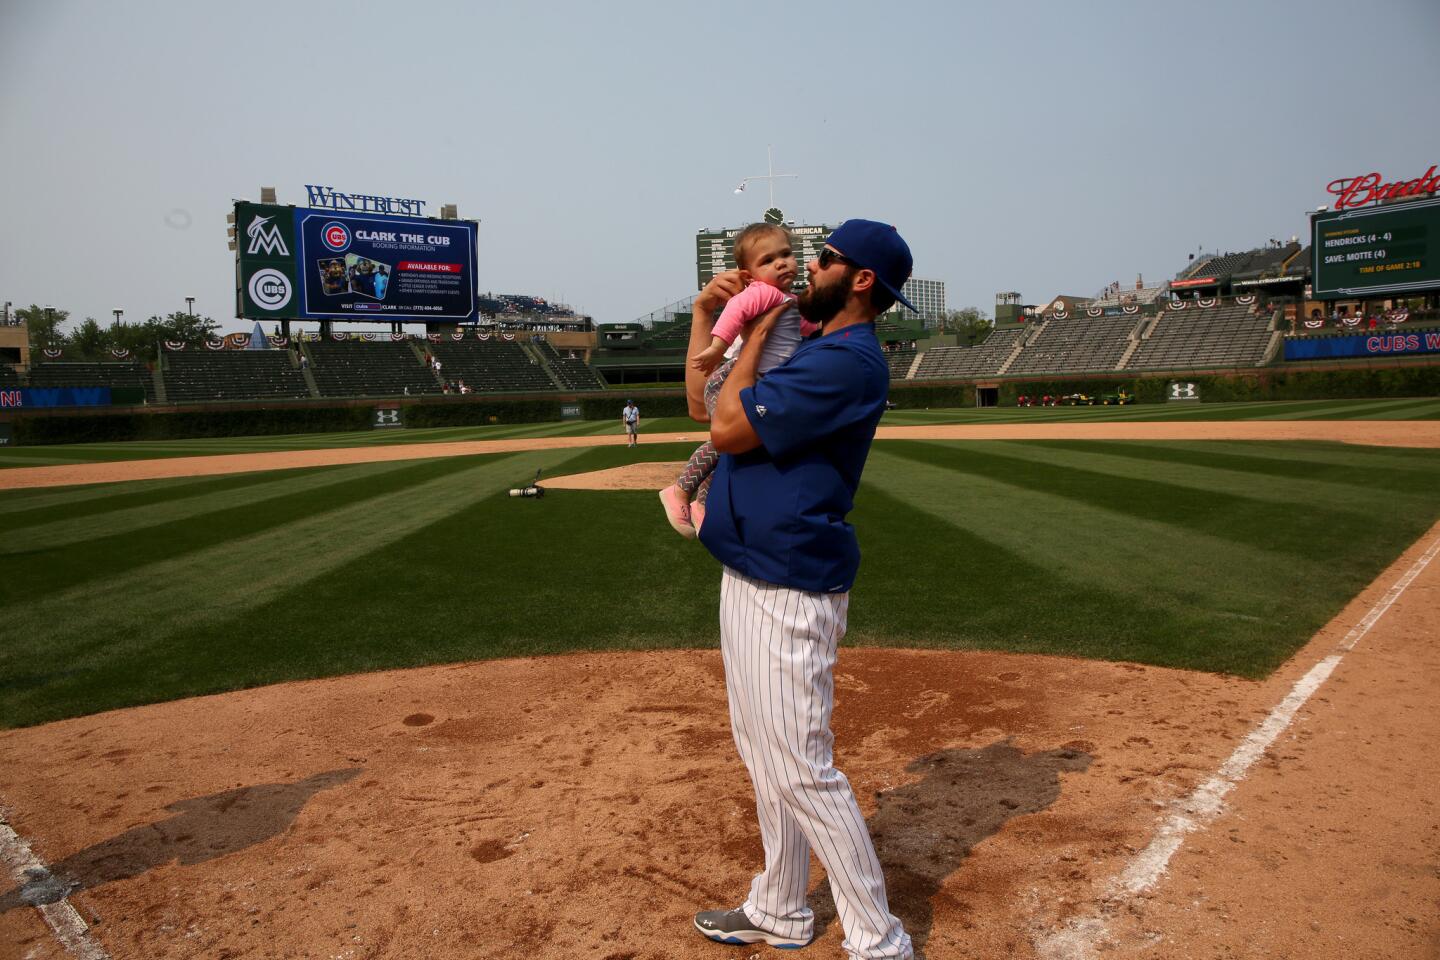 Jake Arrieta runs the bases after the game with his daughter Palmer.